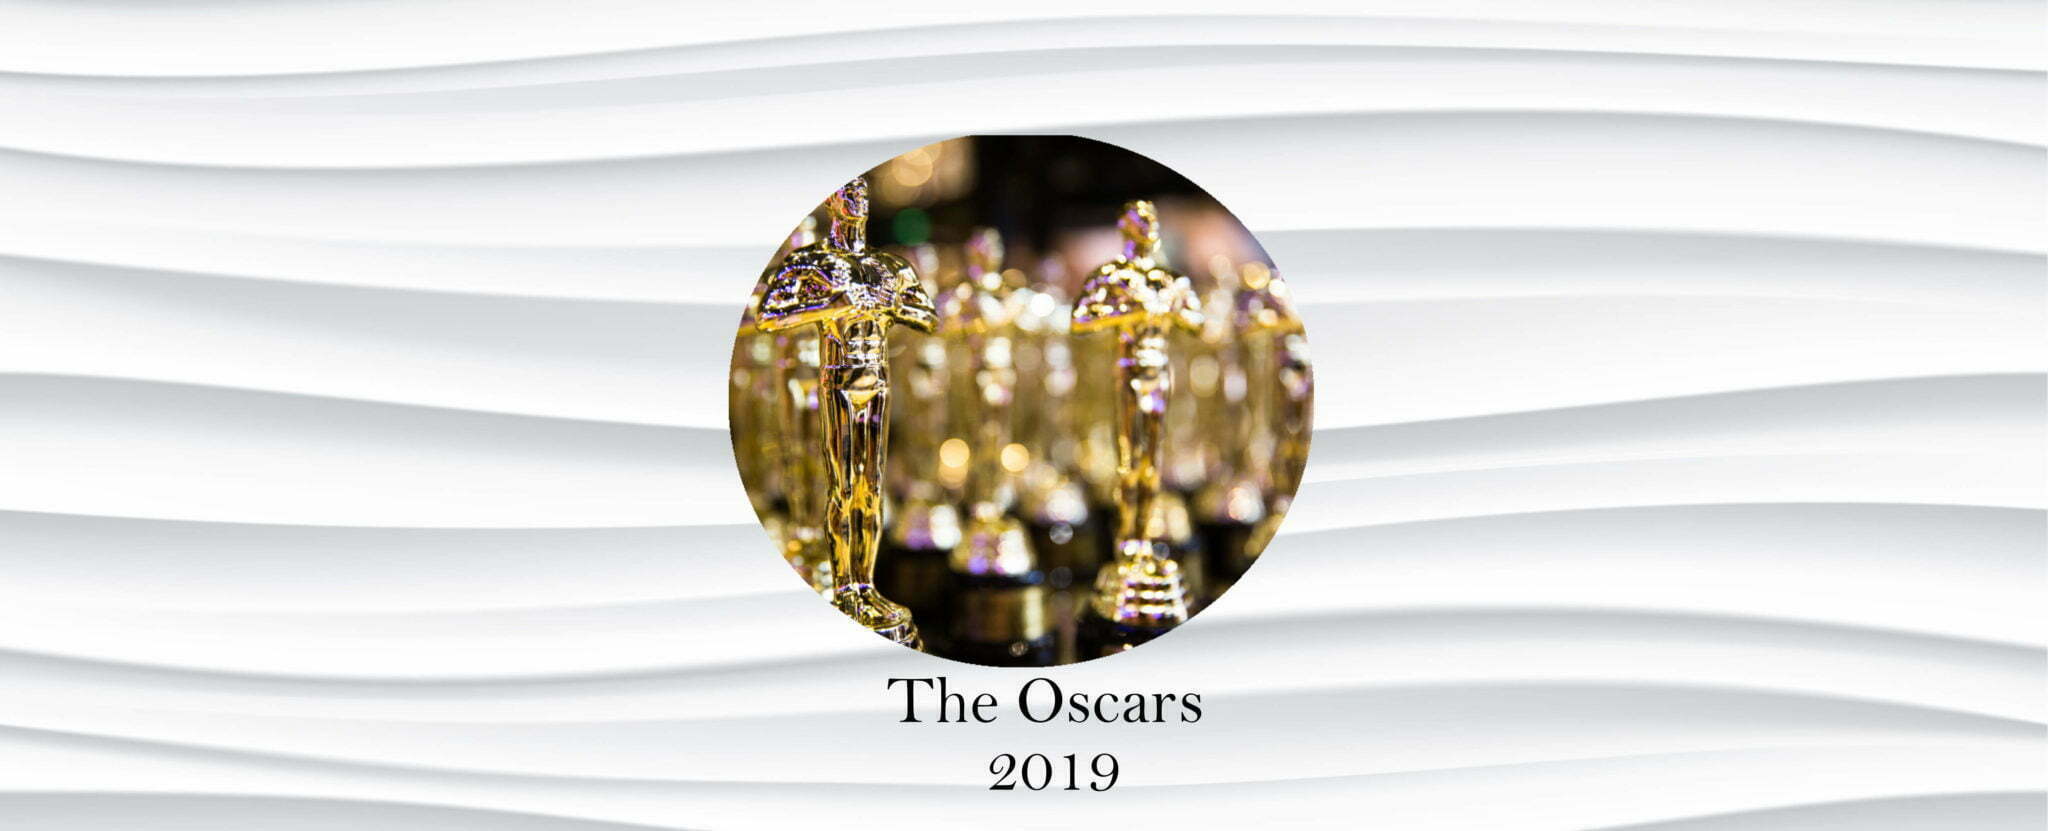 The Oscars 2019 – what you need to know